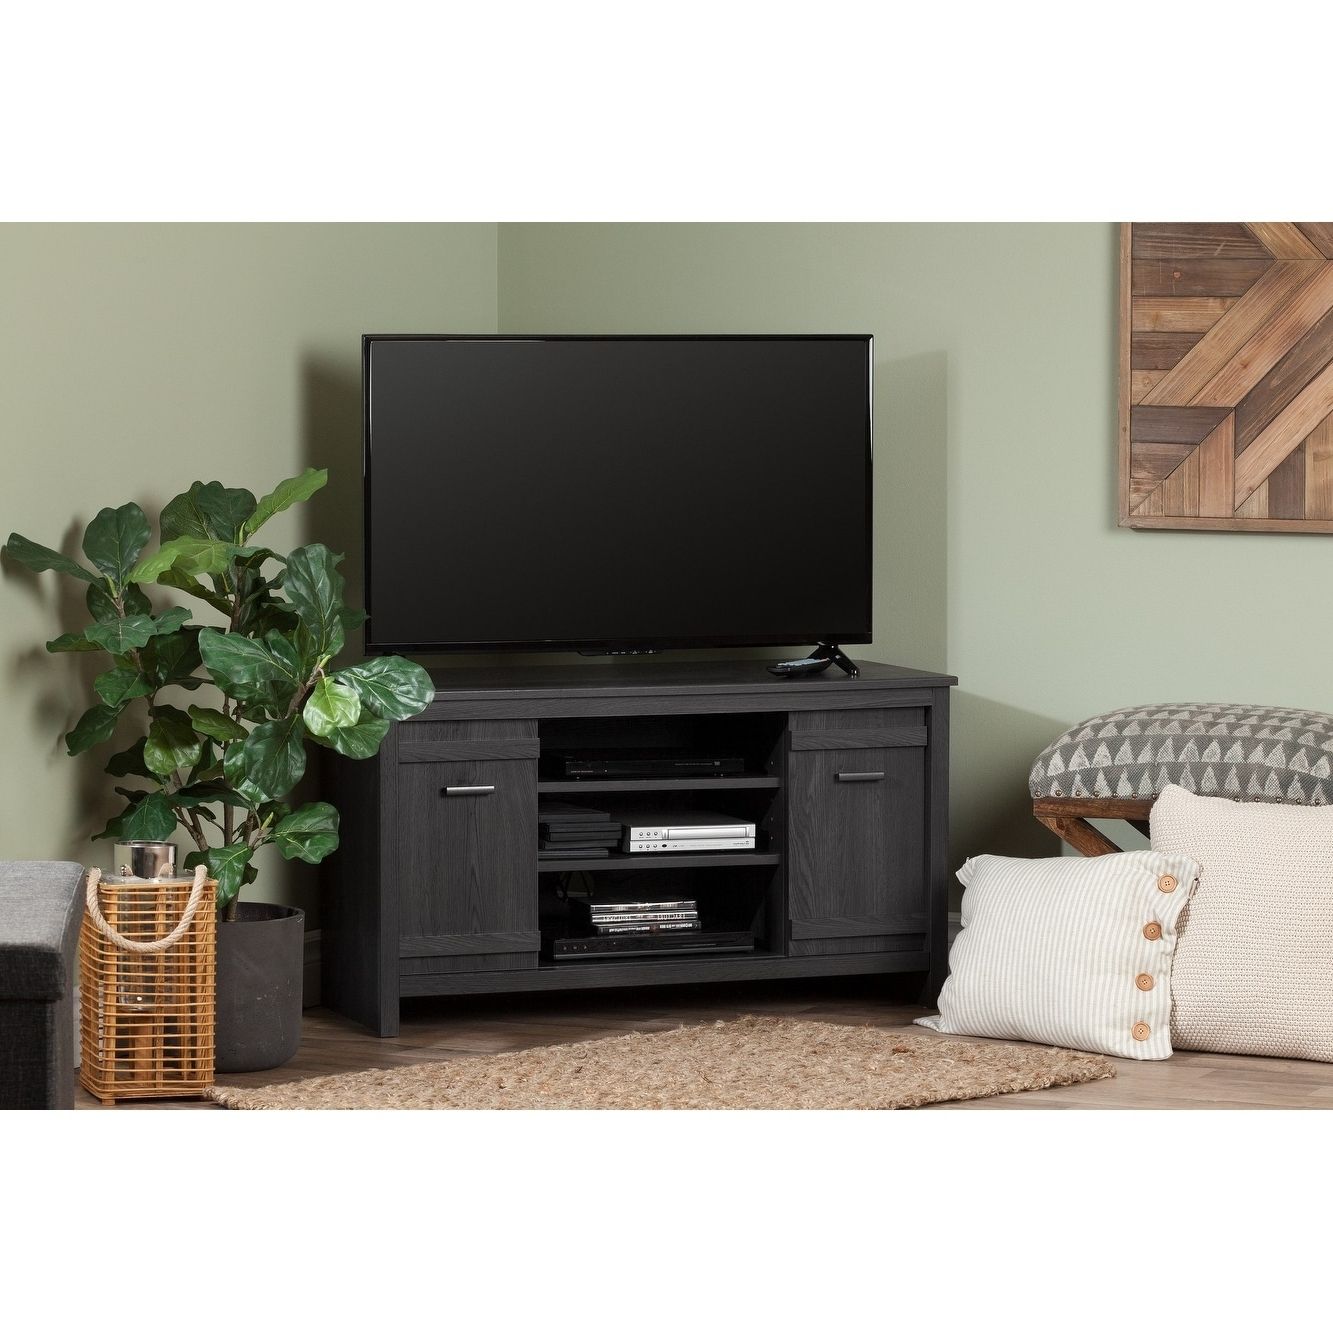 Exhibit Modern Storage Living Room Corner Tv Stand – 42 With Regard To Farmhouse Tv Stands For 75" Flat Screen With Console Table Storage Cabinet (Gallery 1 of 20)